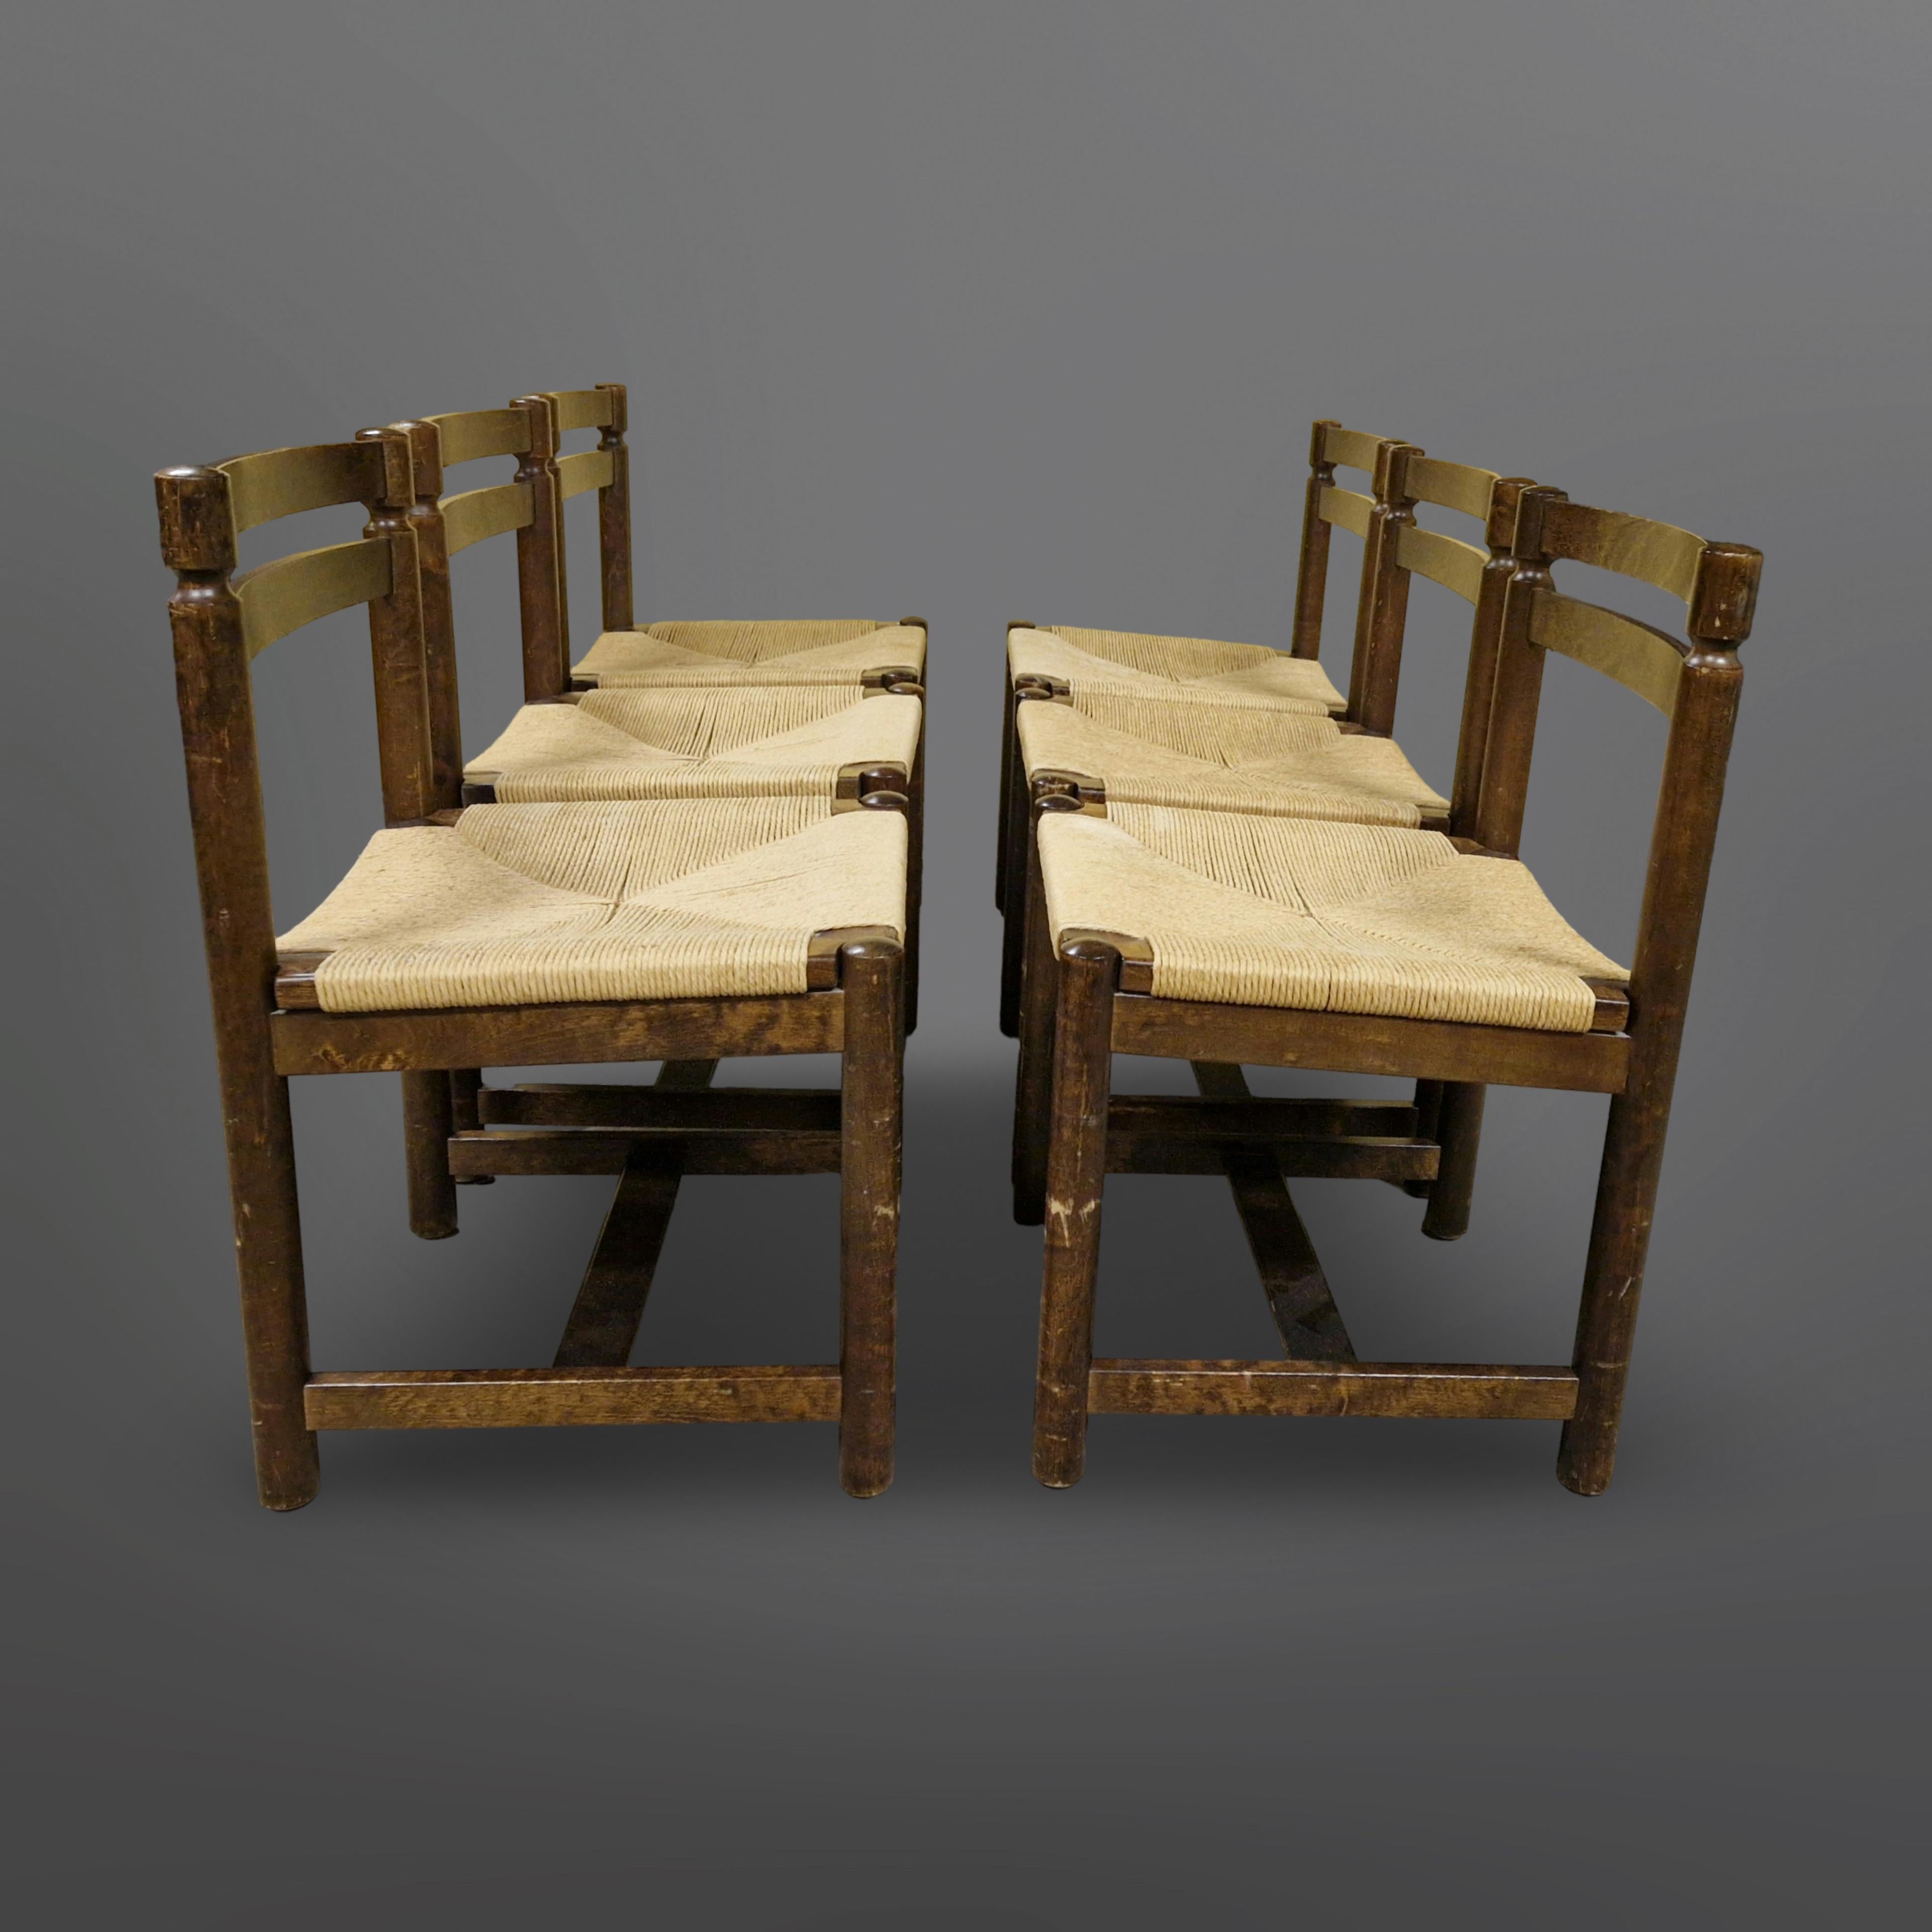 Set of 6 solid wood dining chairs. Designed in the style of Charlotte Perriand and Pierre Jeanerette. The seats are handwoven with papercord. The chairs have some signs of wear consistent with age and use. The seats are in very good condition.